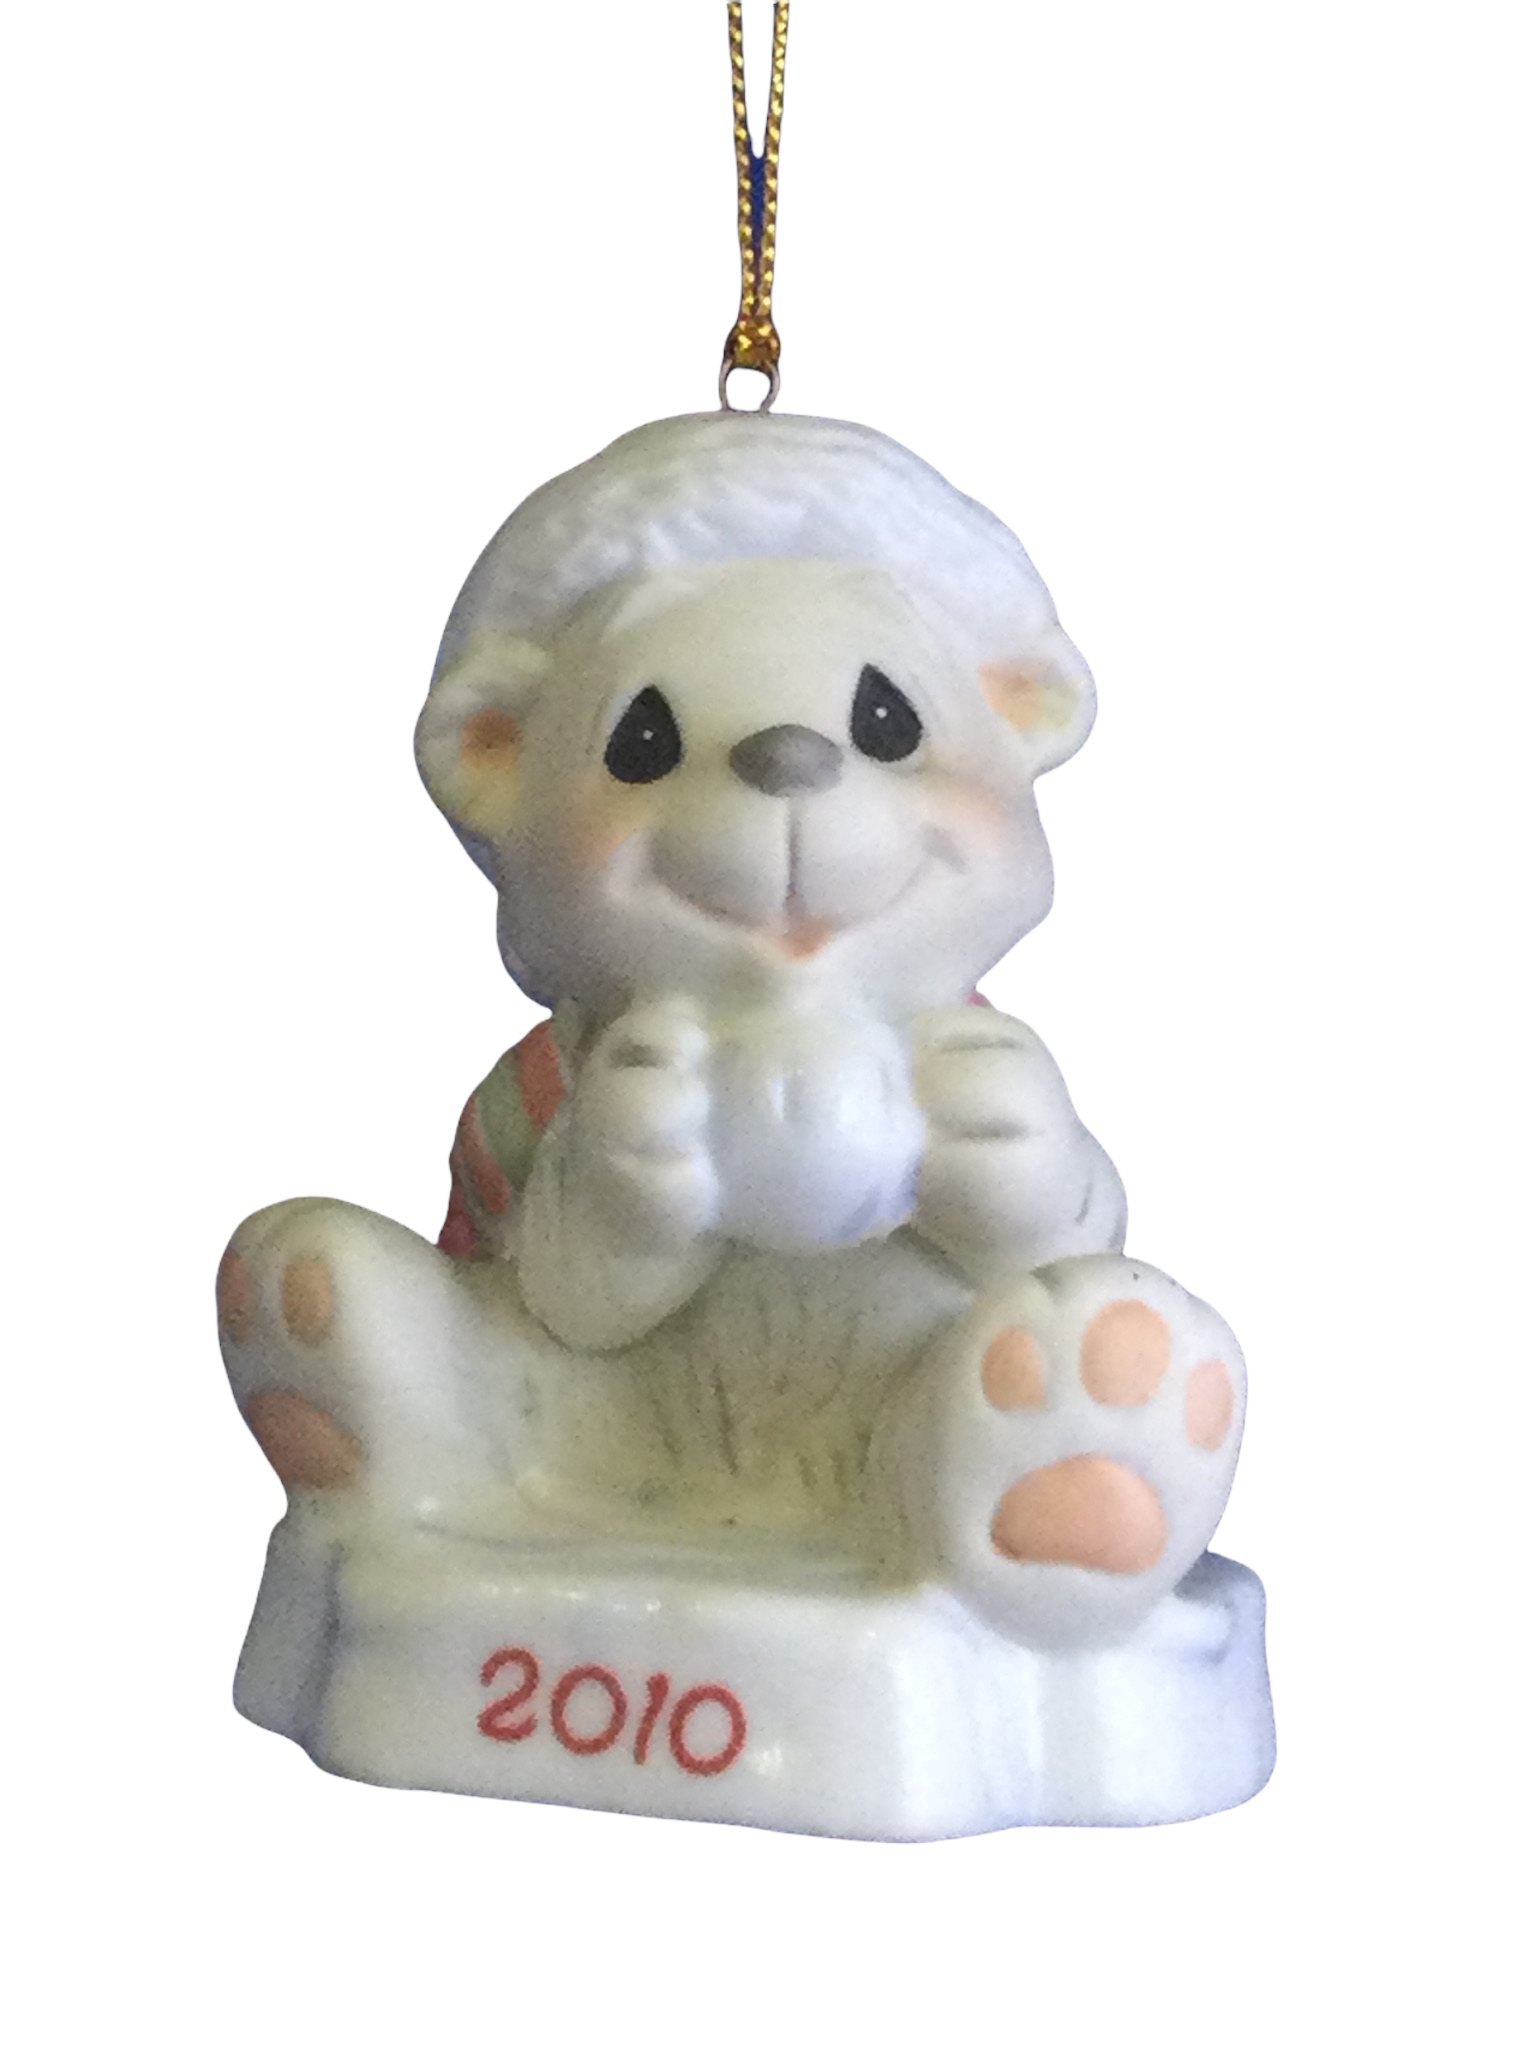 Snow Day Like A Holiday - 2010 Dated Annual Precious Moment Ornament